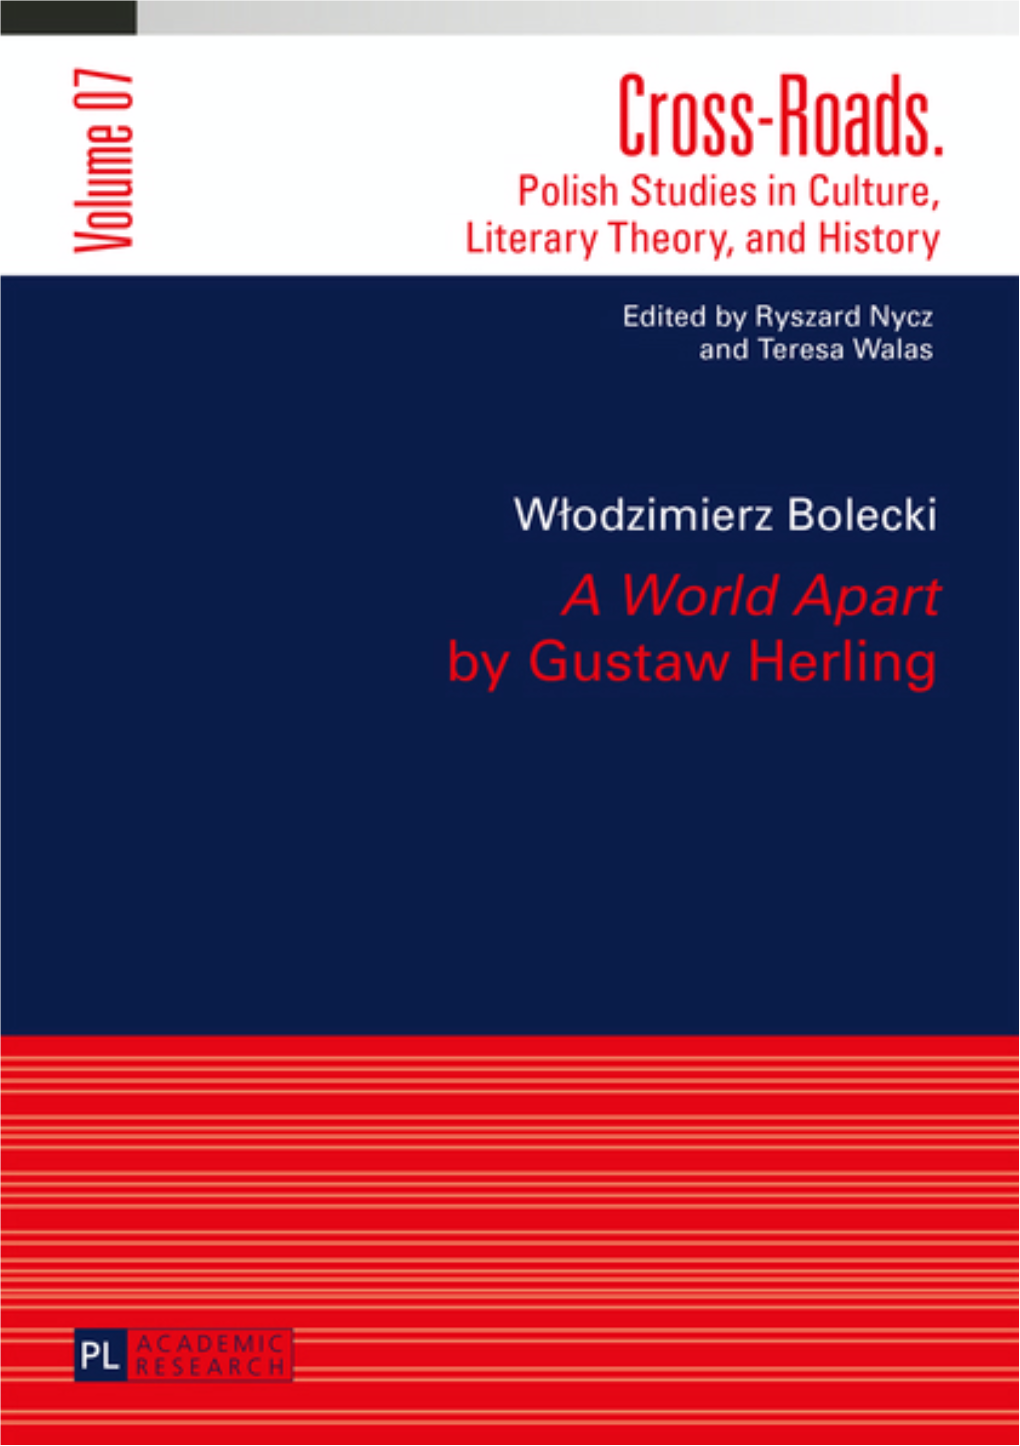 Gustaw Herling-Grudziński Became Essential Reading in Poland Shortly After the Political Transformations of 1989 and After the Abolition of Censorship in April 1990